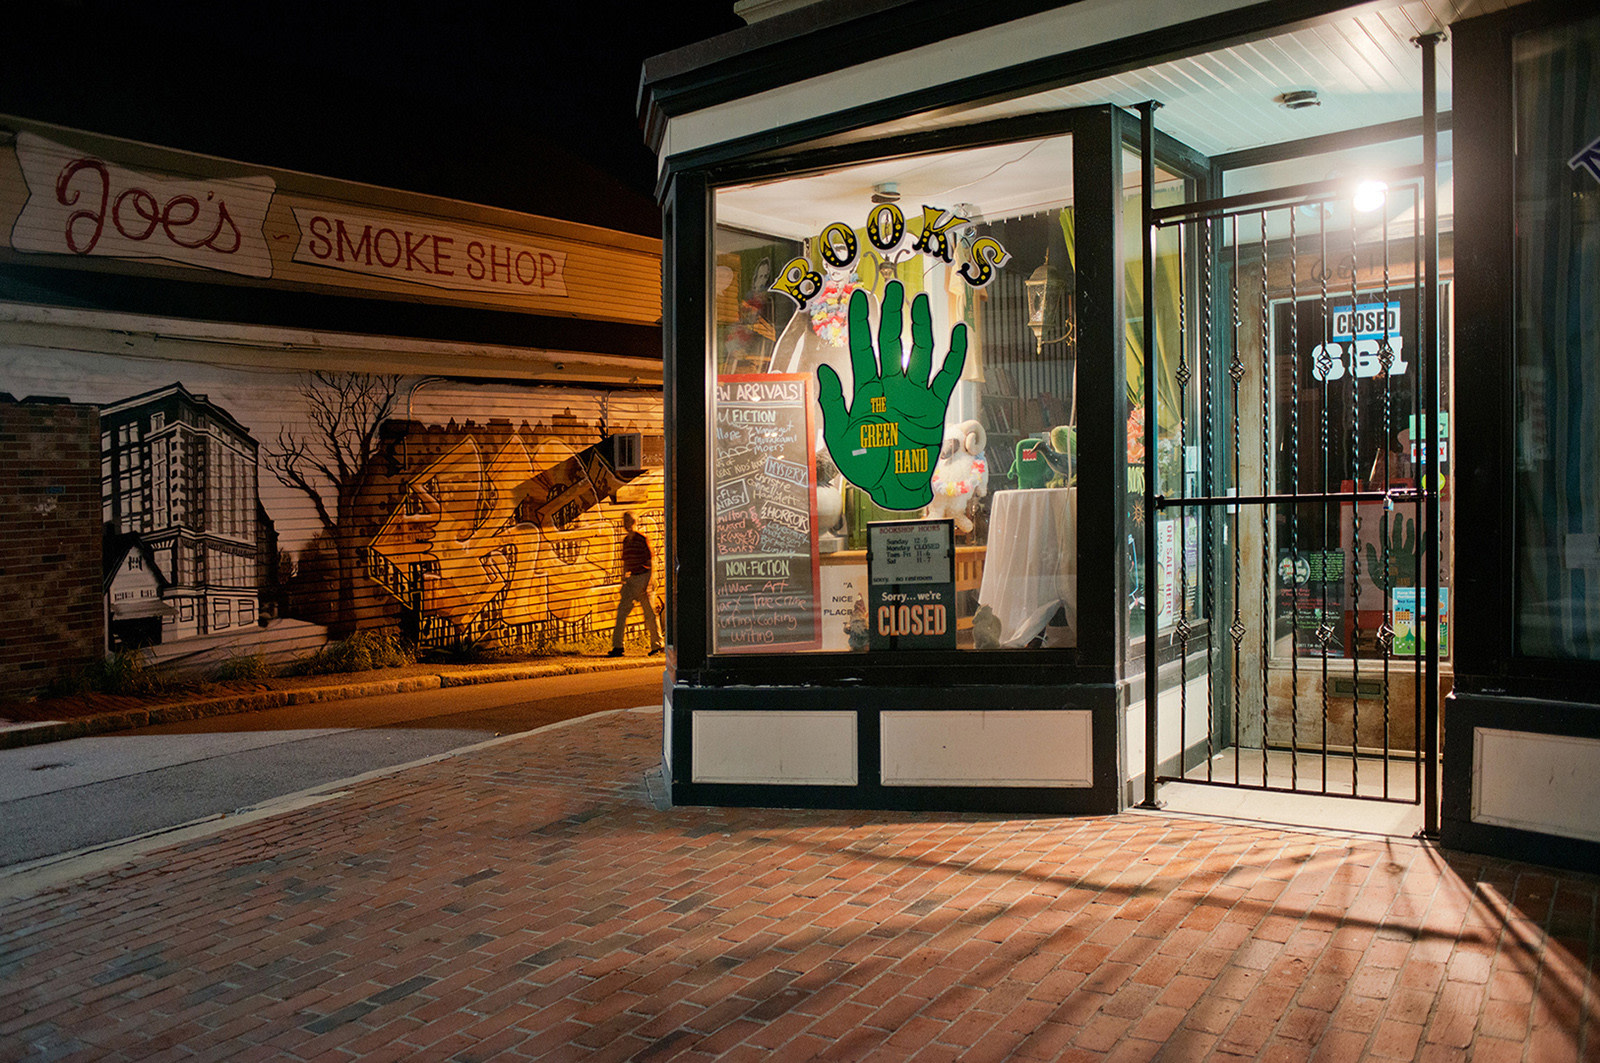 The Green Hand, Portland, ME, 2012.&nbsp;Archival pigment print&nbsp;available in: 20 x 24 inches, edition of 15; 30 x 40 inches, edition 15; and 40 x 50 inches, edition of 5.